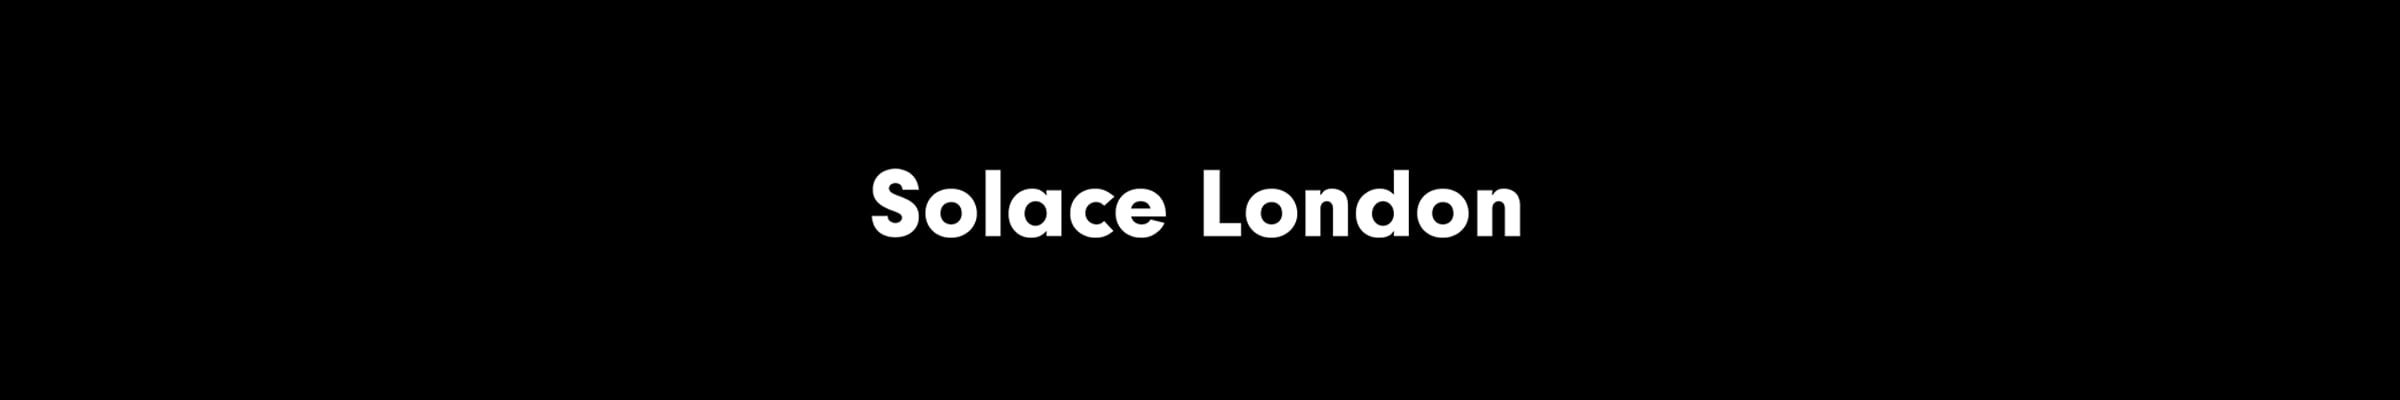 solace-london-banner